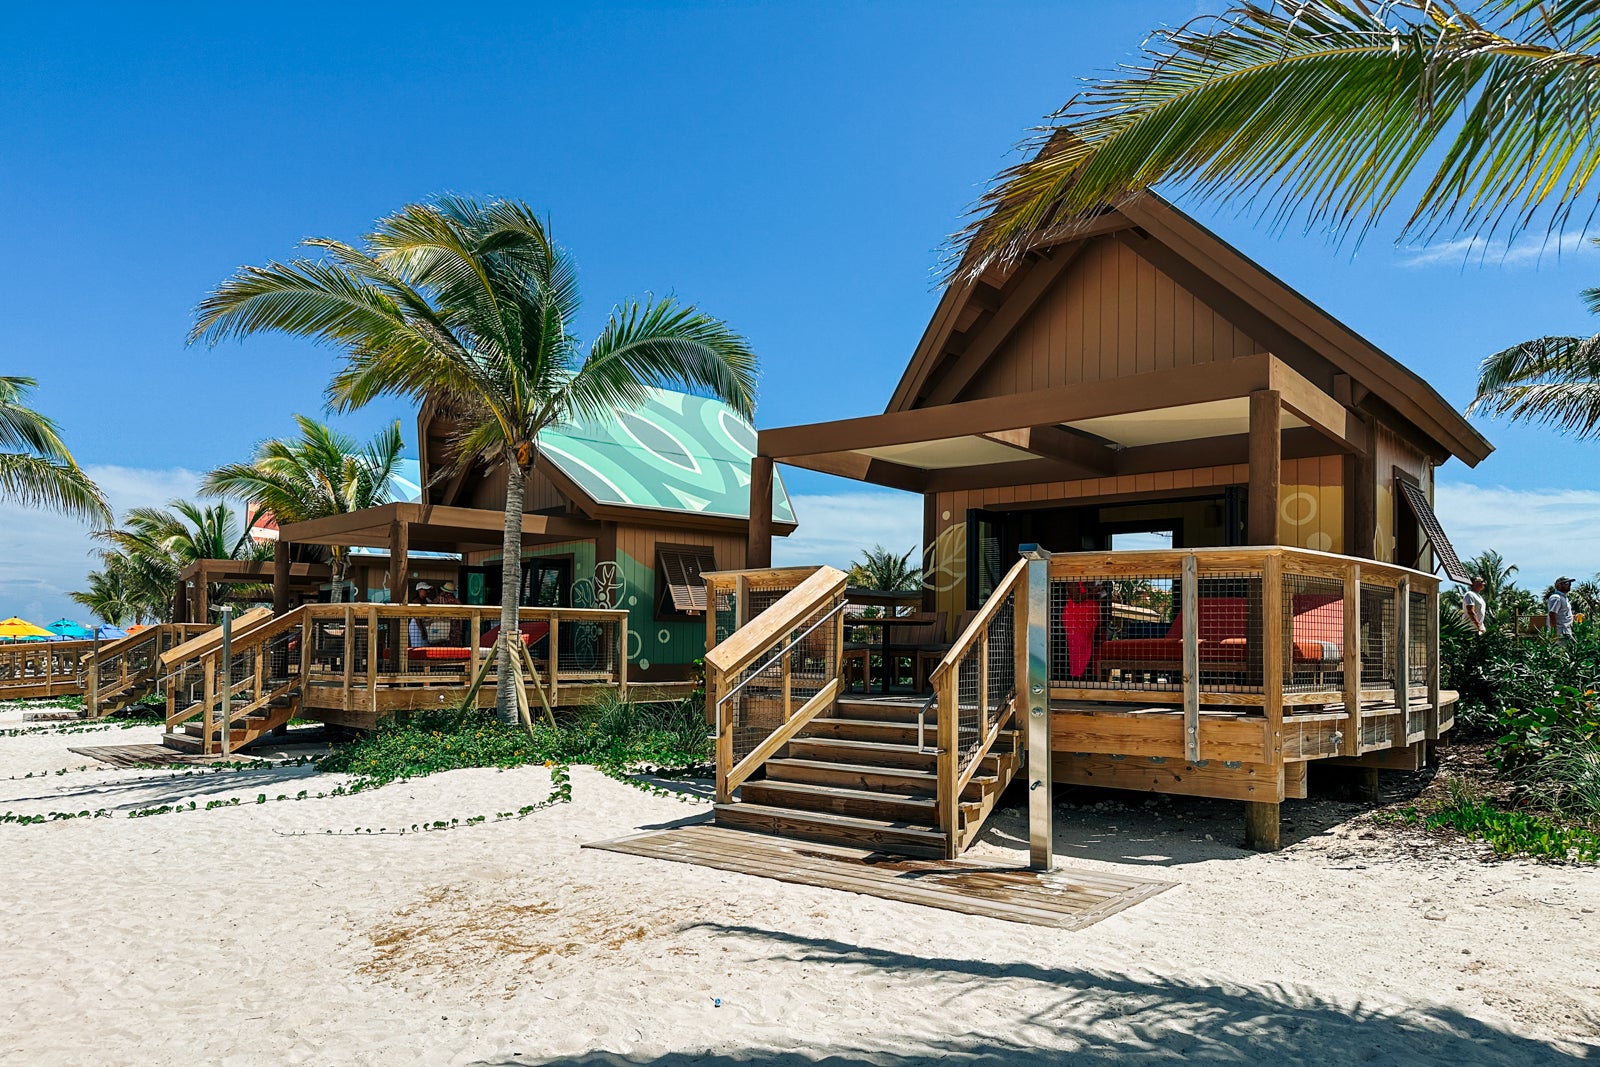 Private cabanas on the beach